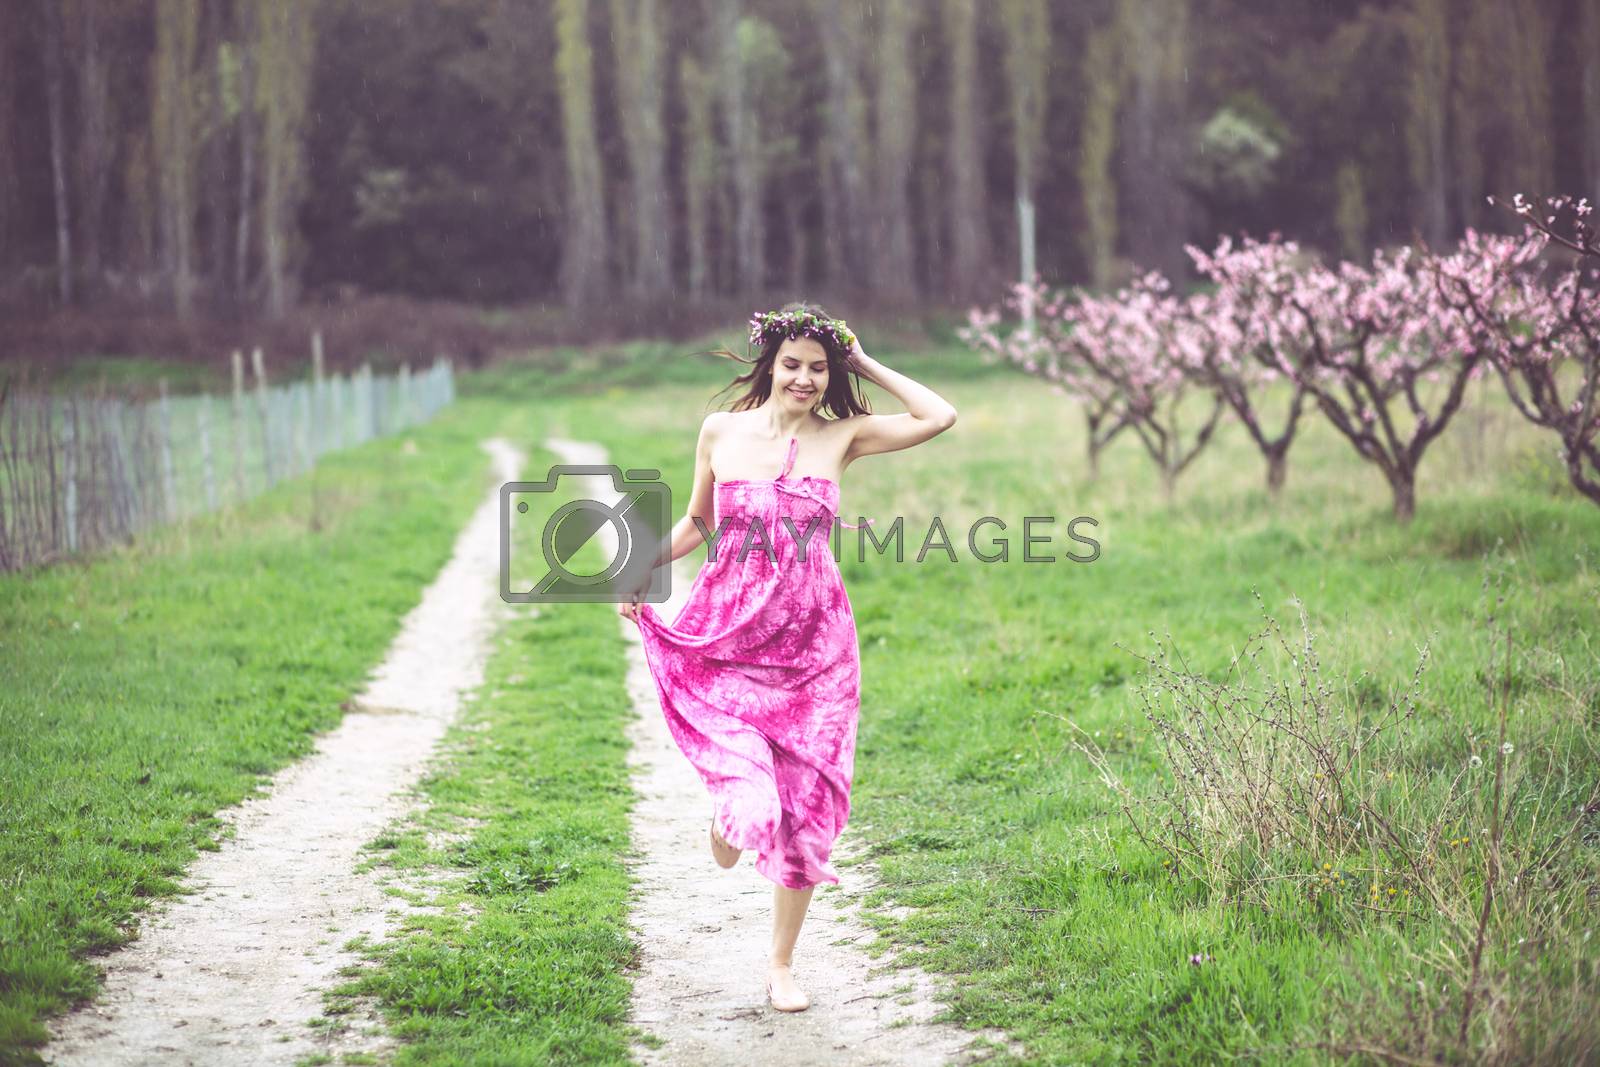 Royalty free image of Woman in spring garden by alenkasm